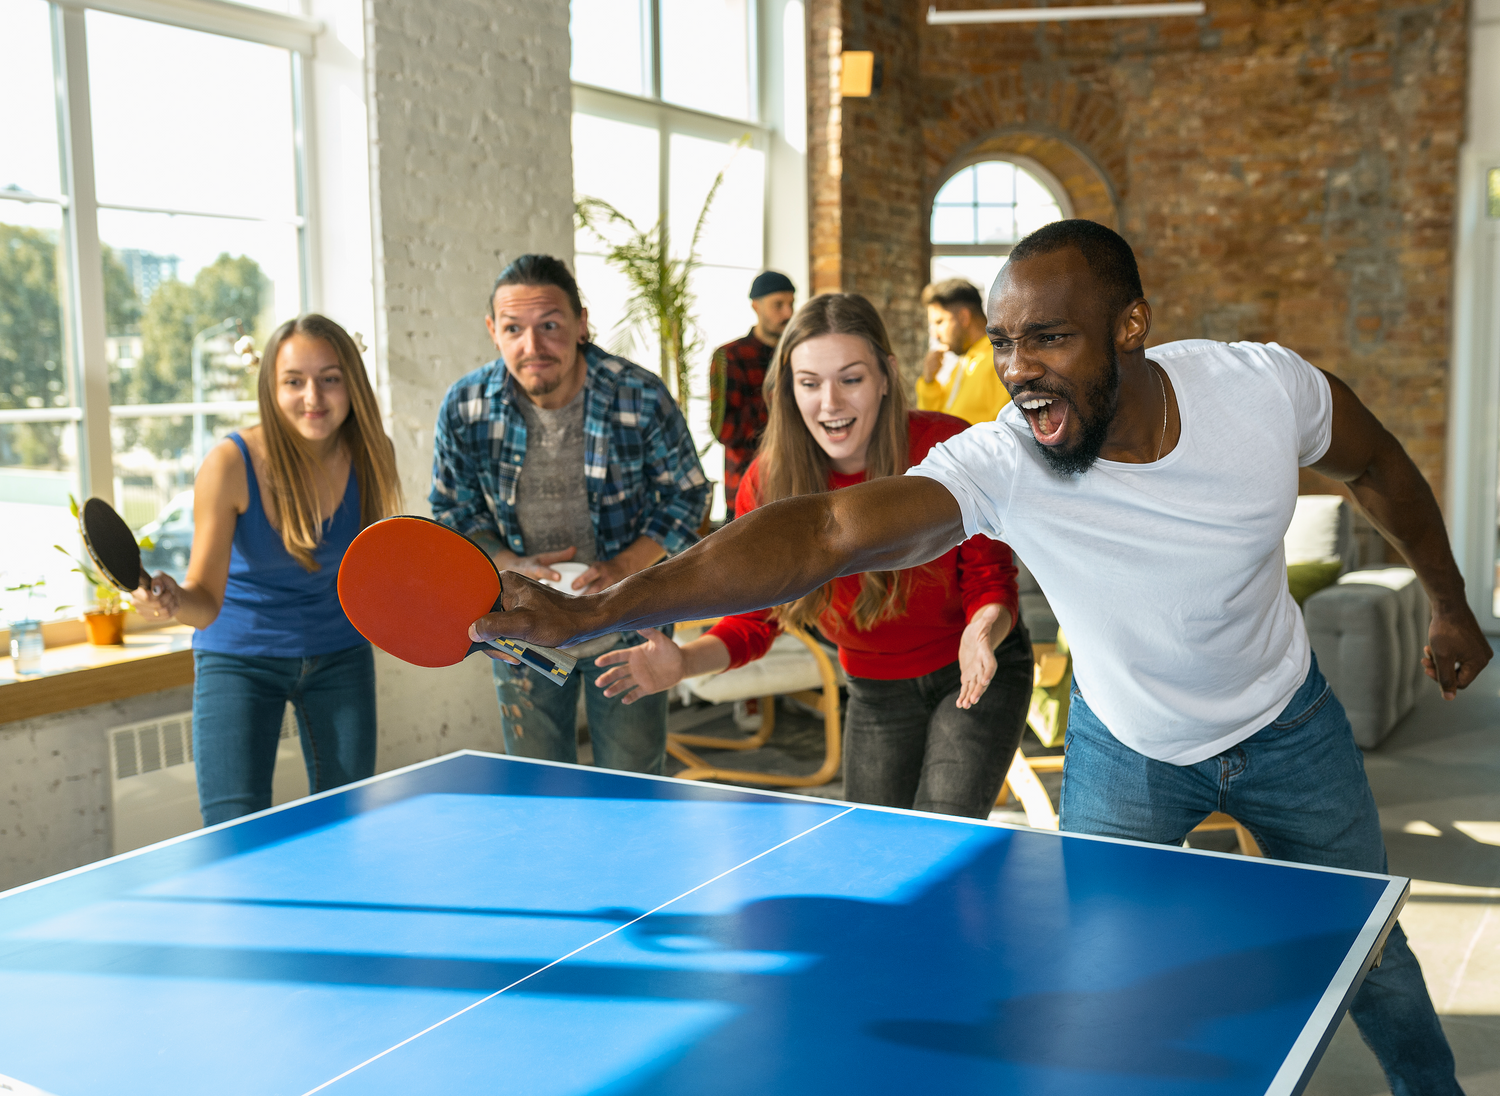 Table Tennis – “Sport for ALL & Sport for LIFE!”